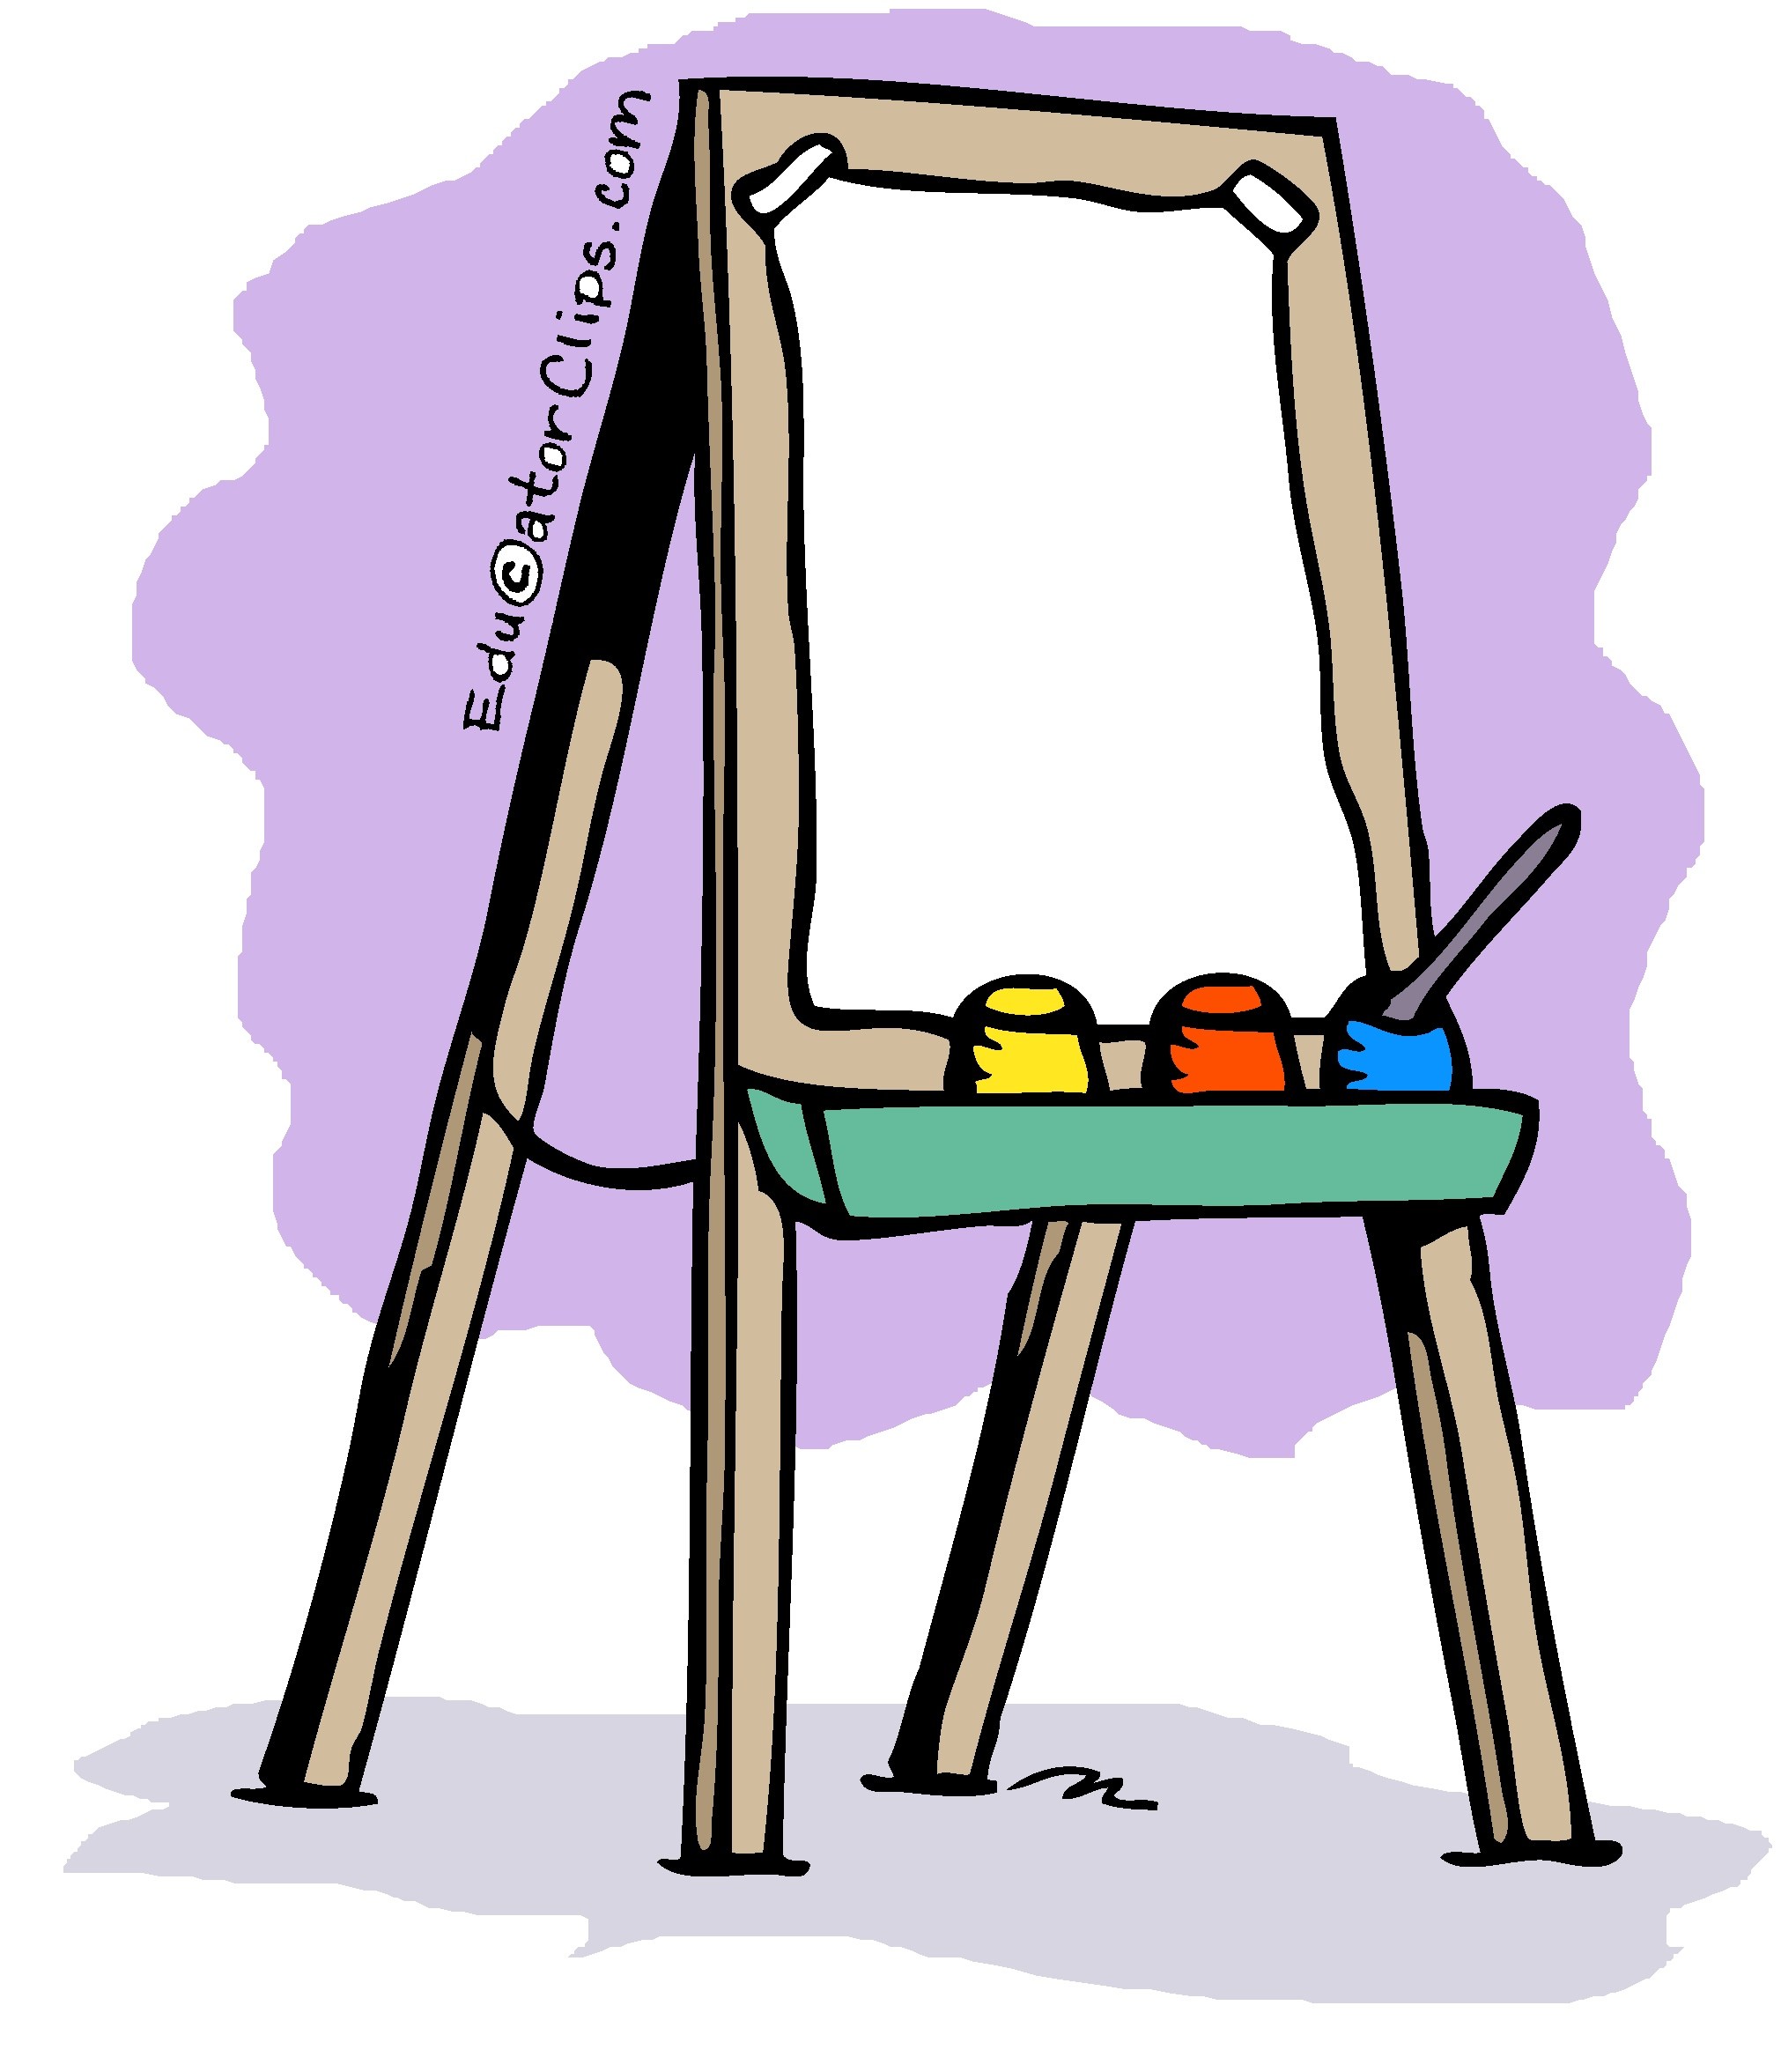 Easel clipart artist easel Easel artist easel Transparent FREE for